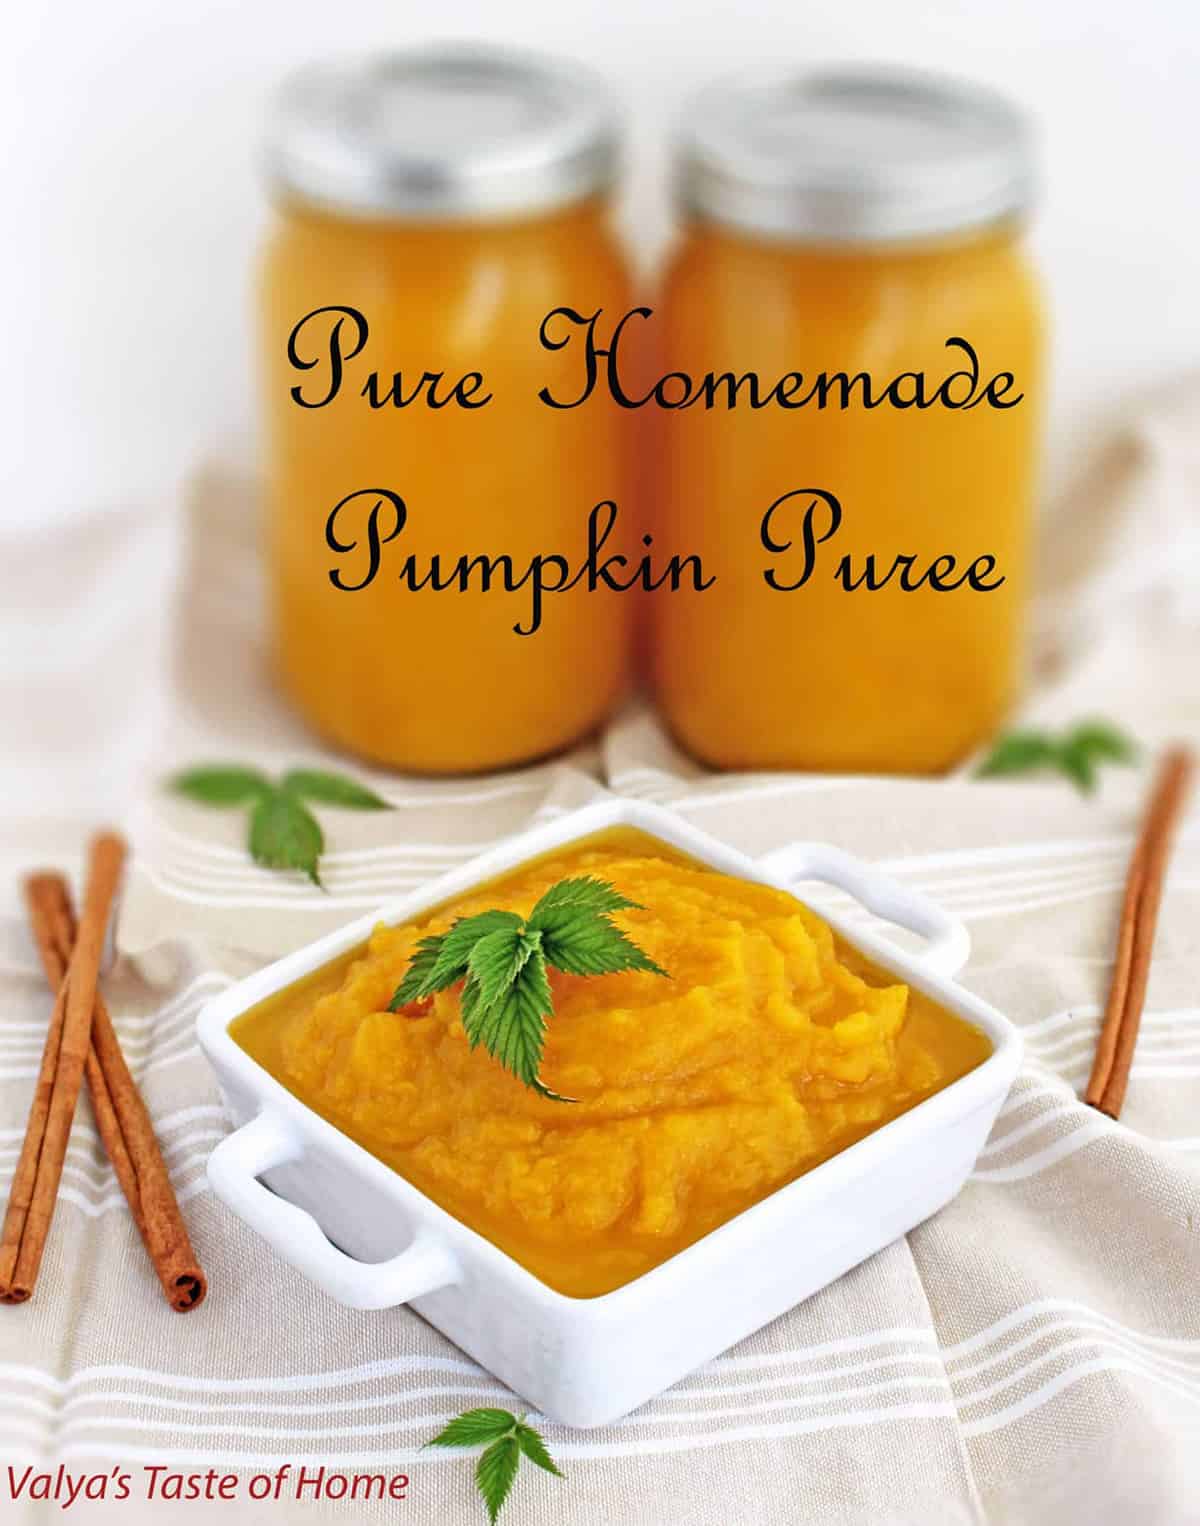 These are my favorite pumping goodies in one Top 10 Pumpkin Fall Recipes post that is perfect for upcoming holidays or any time you want your kitchen to smell like fall aroma of cinnamon, nutmeg, and pumping.